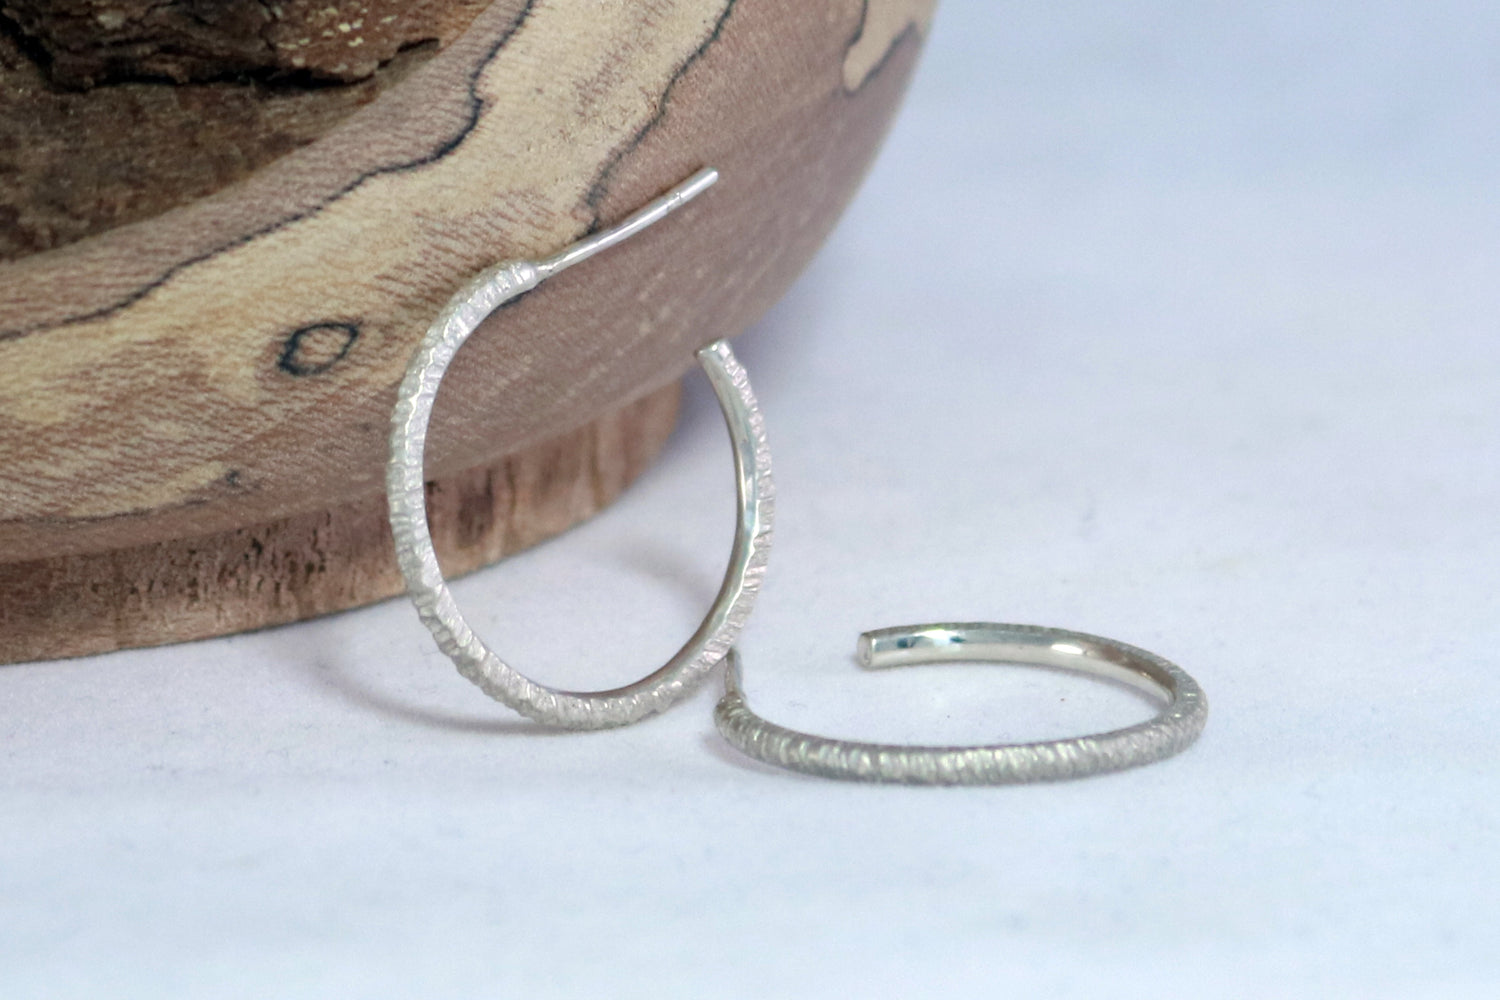 A pair of silver hoops leaning against a wooden bowl. The hoops are textured.